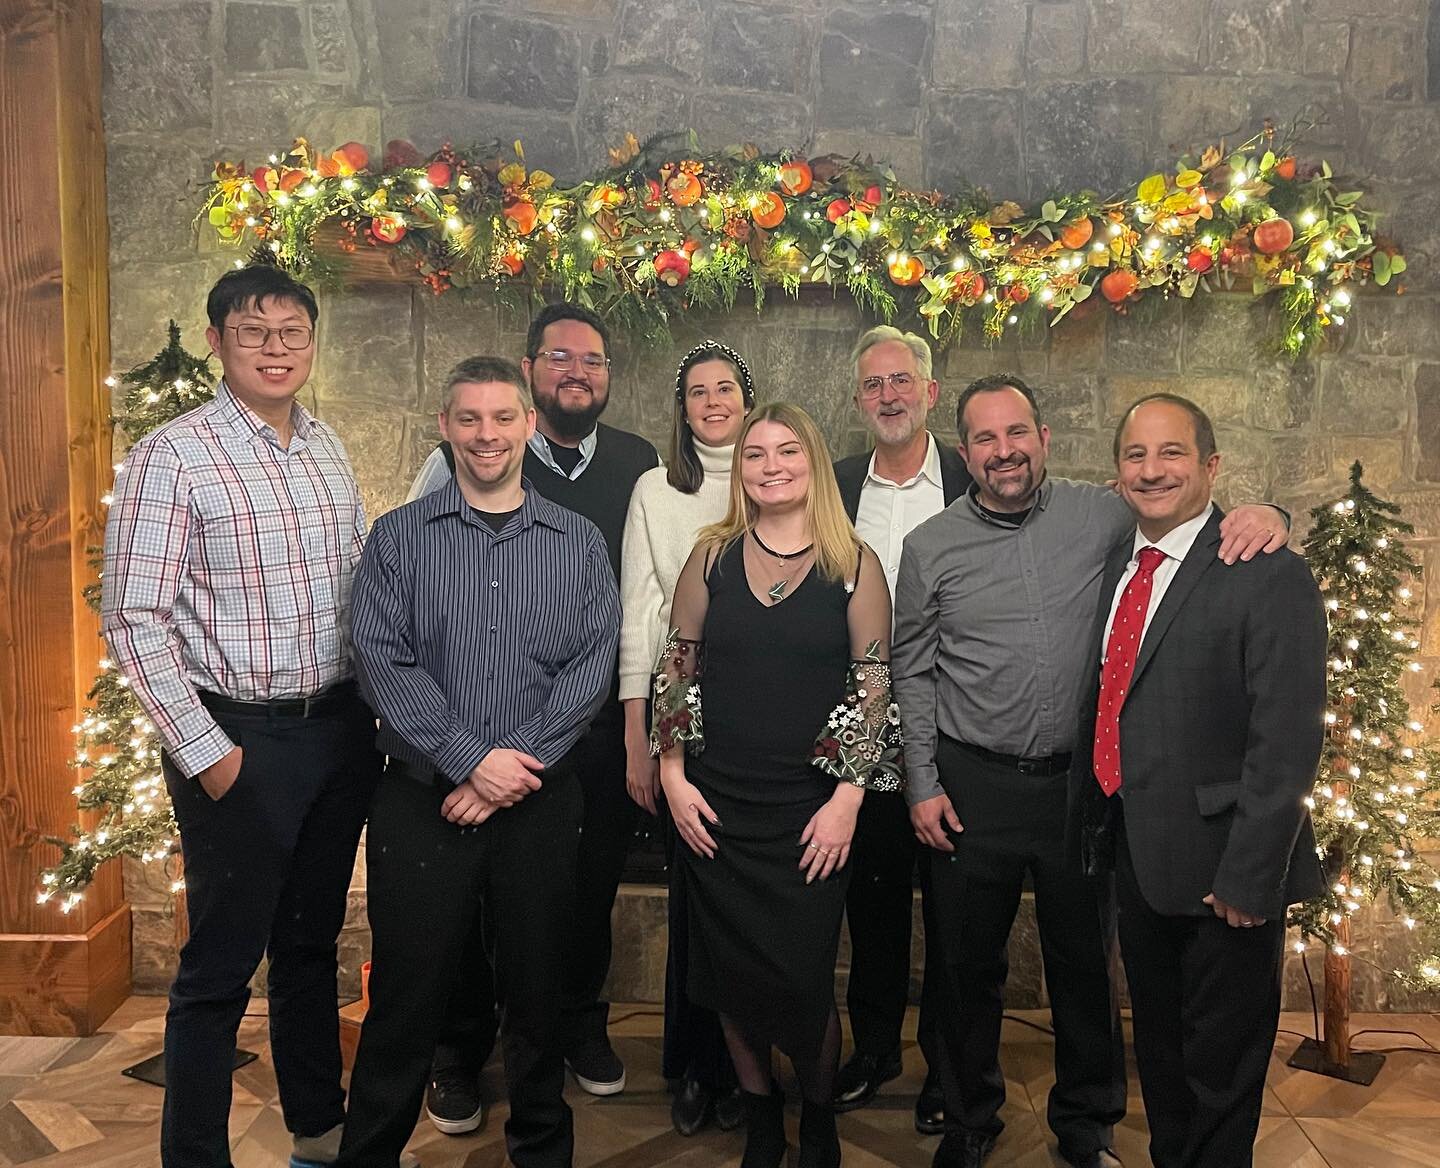 Wishing you a Happy Holidays and a great new year!🎄 

See you IN 2024 🤩
.
.
#architecture #interiordesign #design #happyholidays #holiday #holidays #holidayseason #tistheseason #holidaydinner #team #office #officefun #officeoutting #smallbusiness #